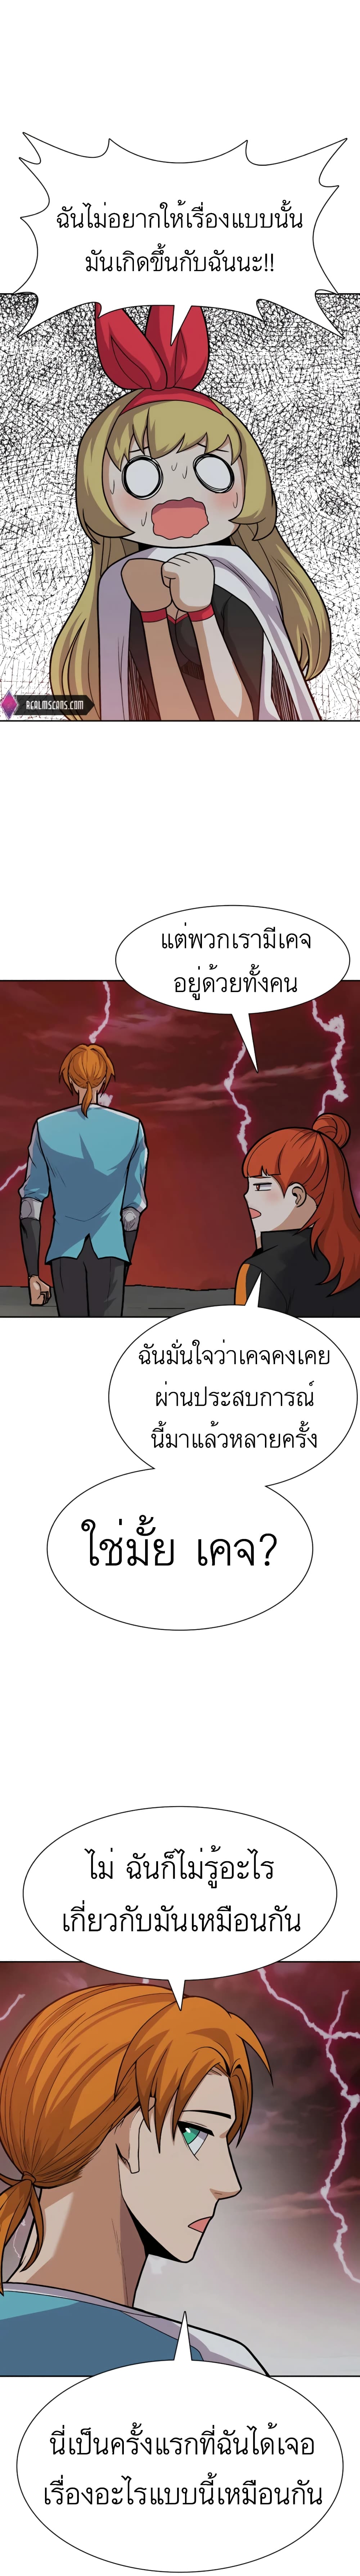 Raising Newbie Heroes In Another World ตอนที่ 28 (6)